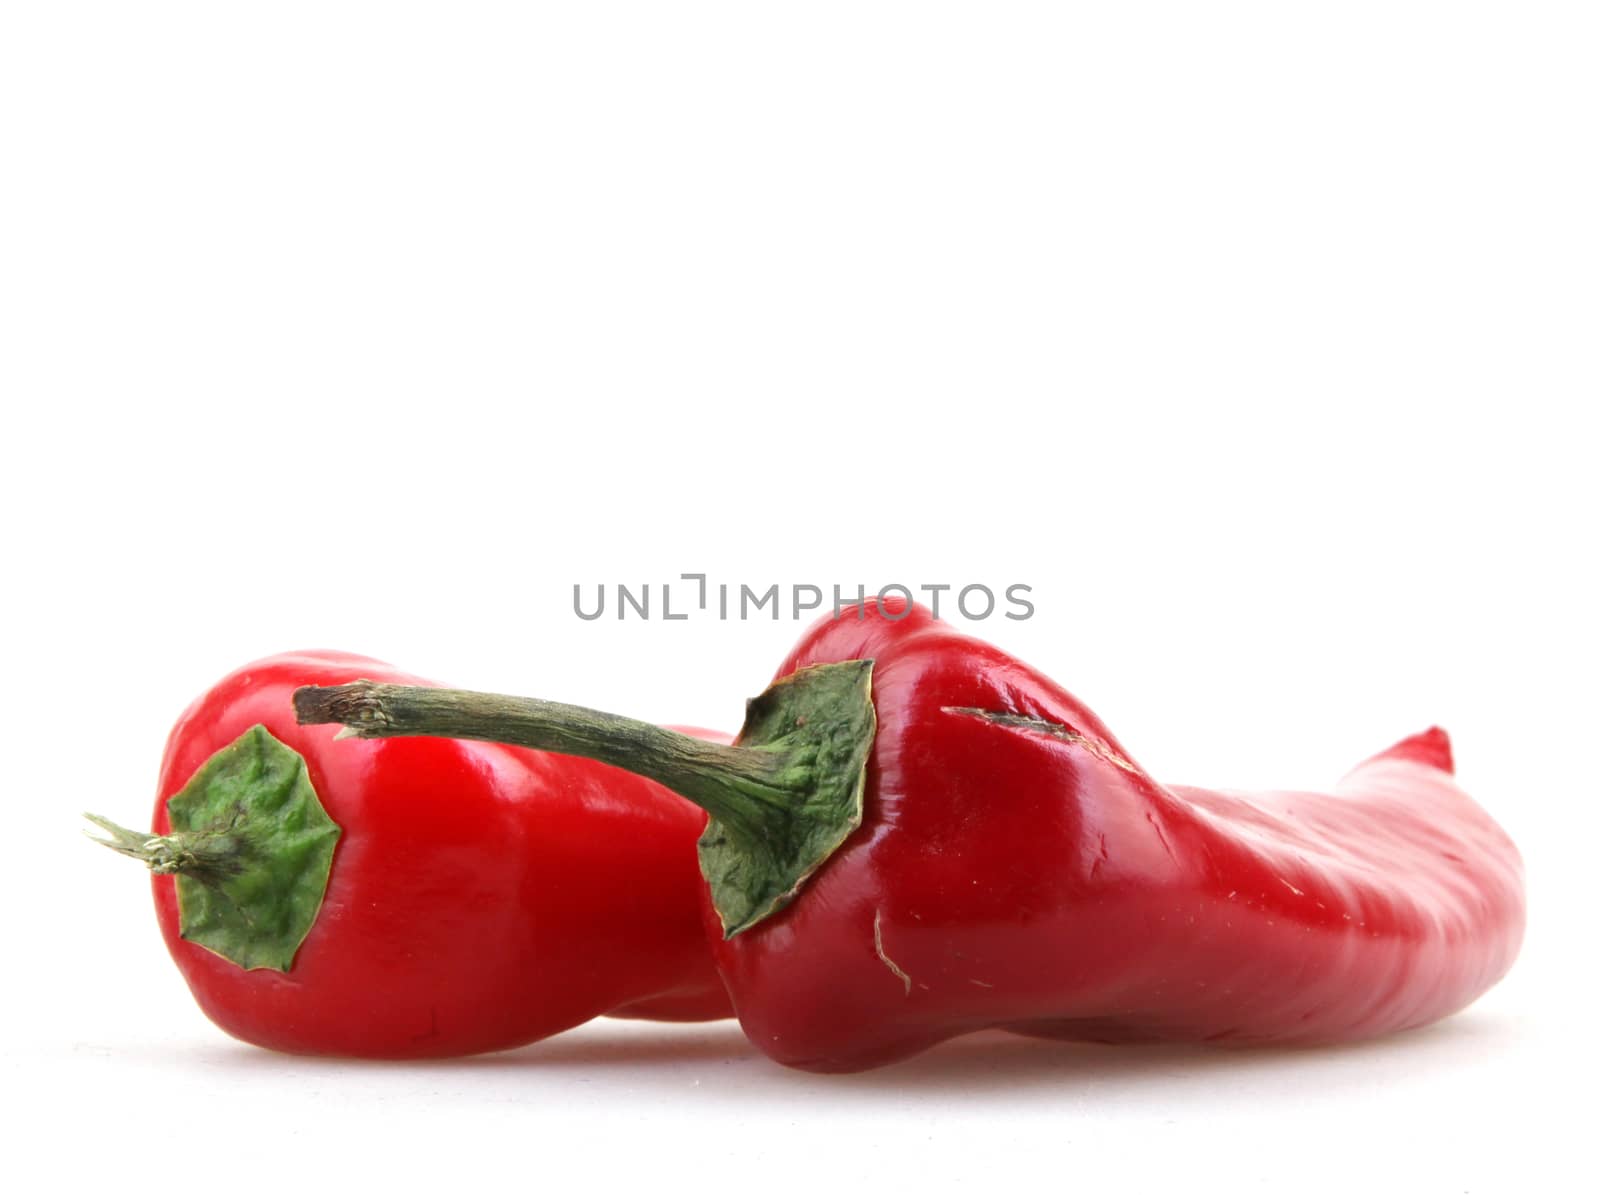 Red peppers on white background by nenov